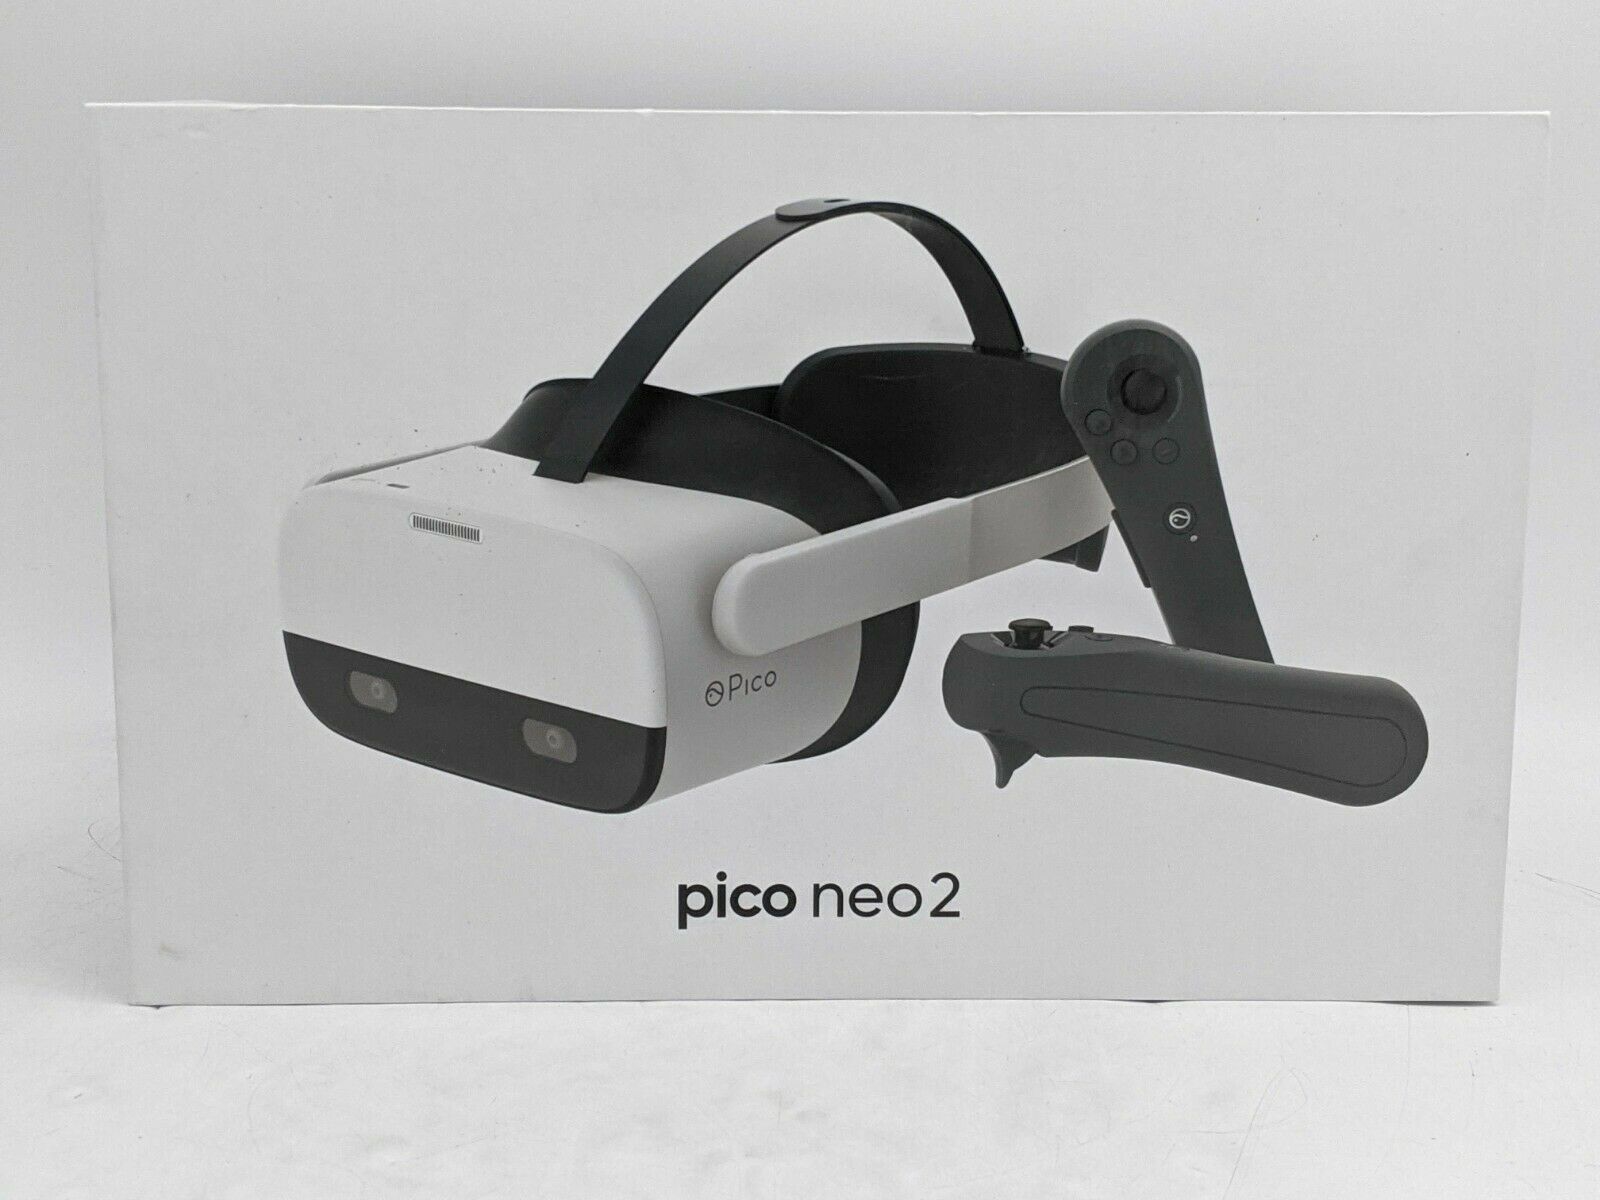 Pico Neo 2 Vr Headset Built-in Spatial Speakers Wireless Pc Streaming -jd0214